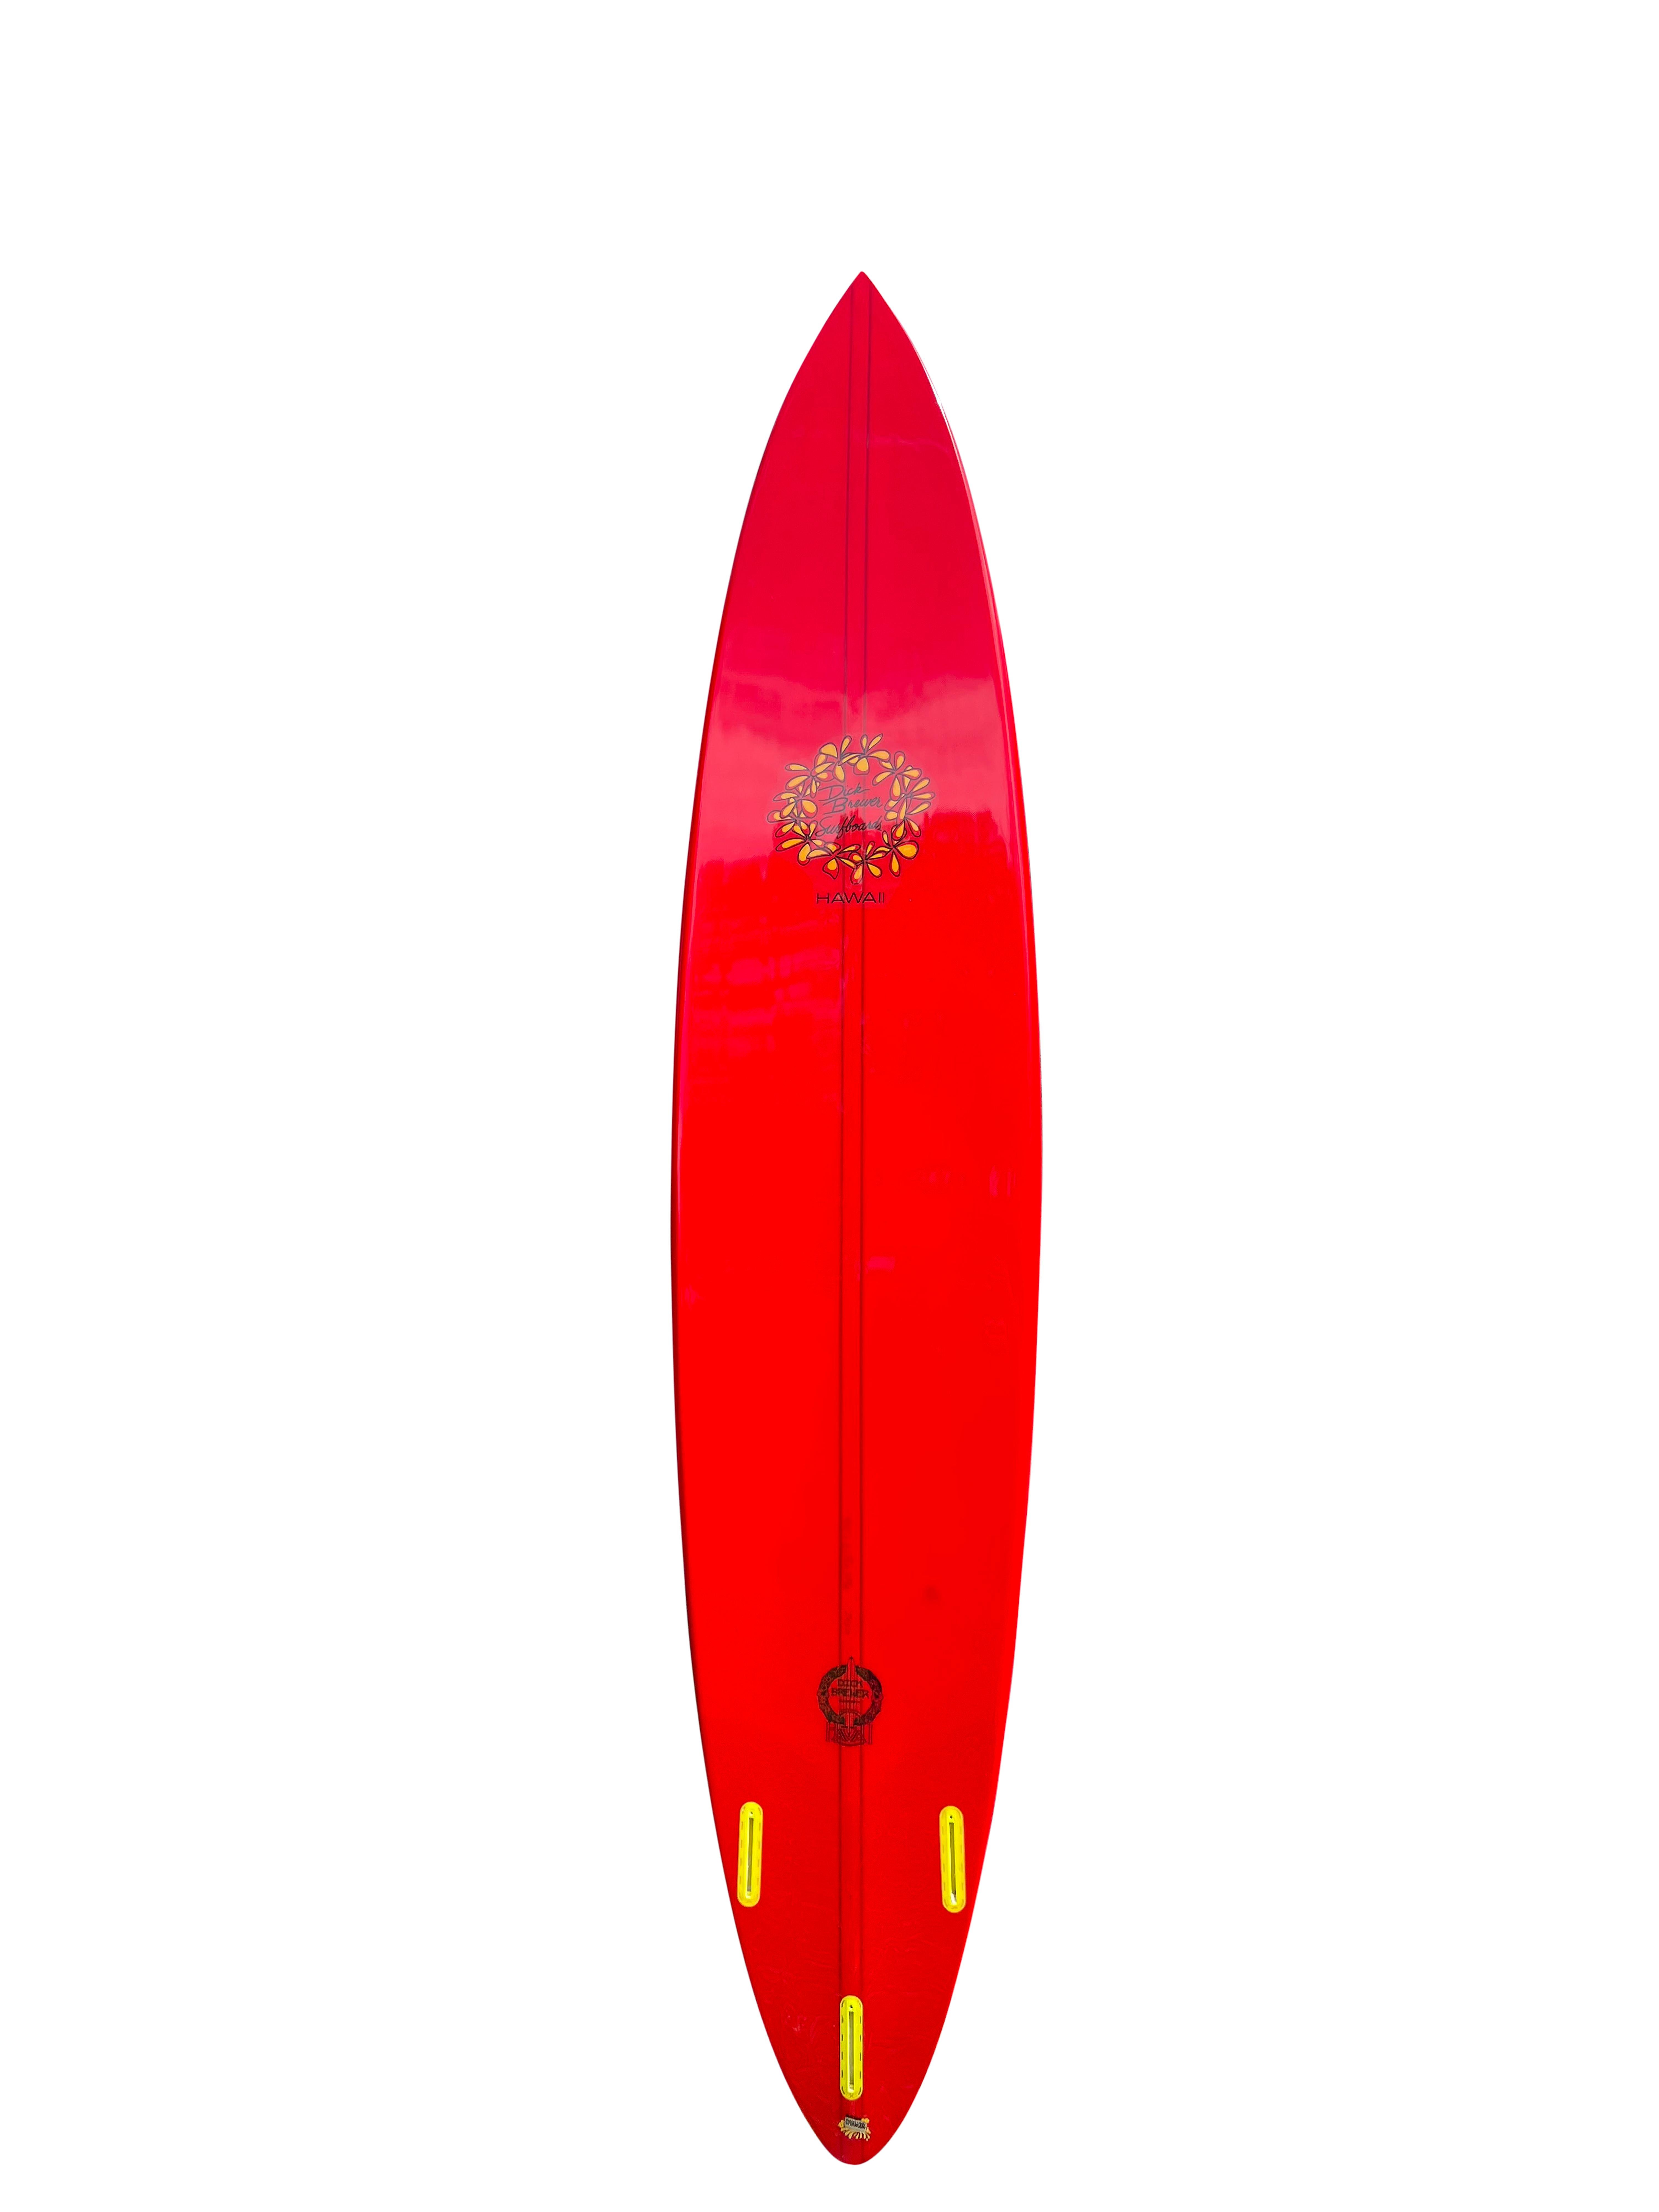 Waimea Bay Big Wave pintail surfboard made by the late Dick Brewer (1936-2022). Features beautiful red tint with vibrant yellow plumeria flower logo. Thruster (tri-fins) with redwood/balsawood T band stringer. Built to ride huge waves at the famous